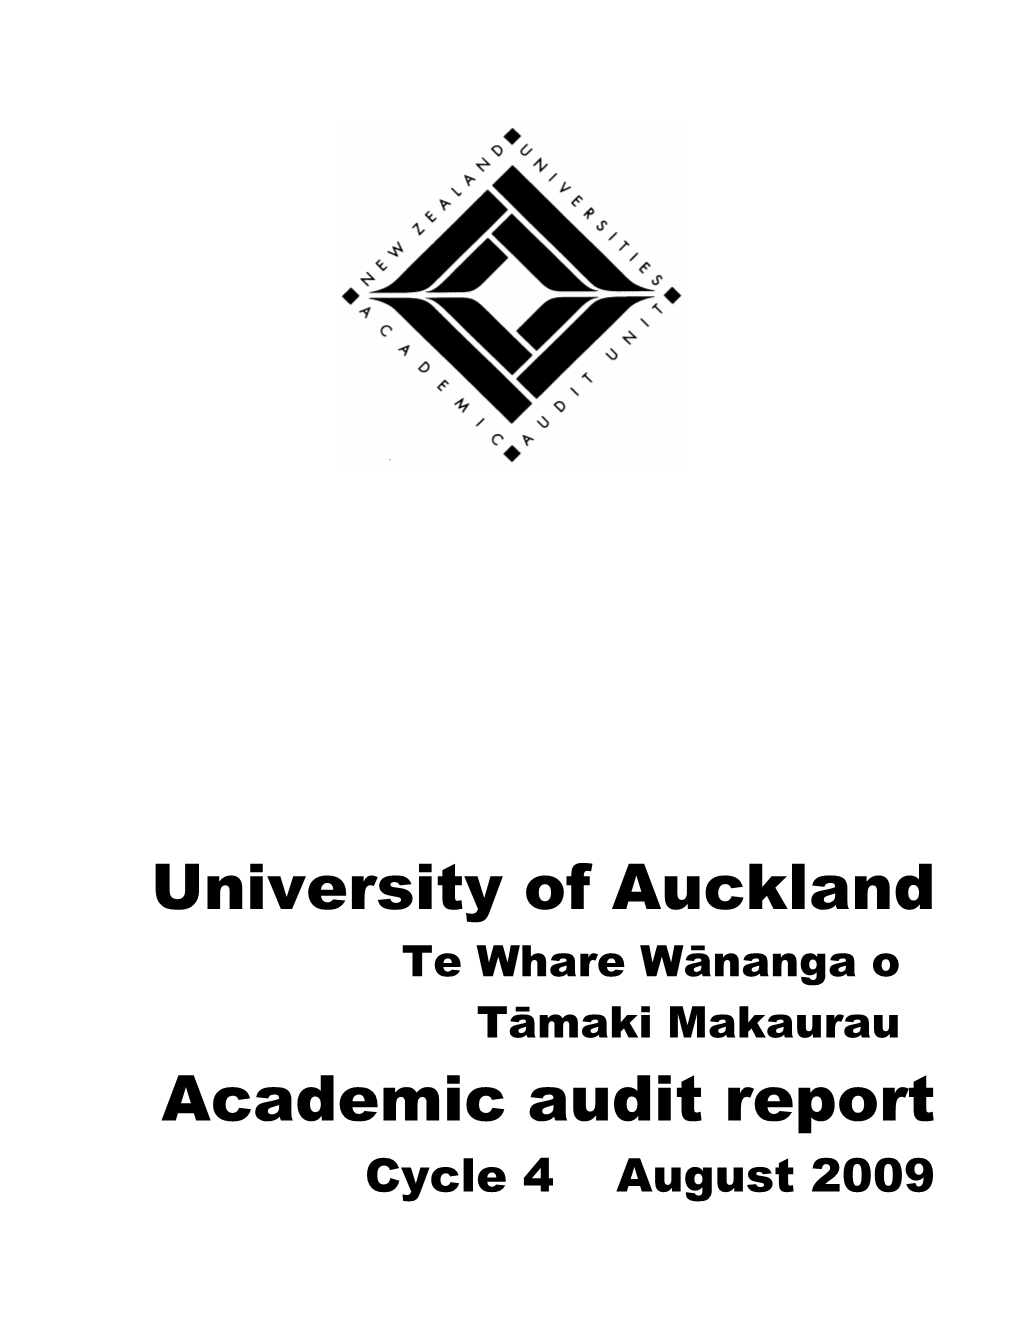 University of Auckland Academic Audit Report, Cycle 3, August 2009